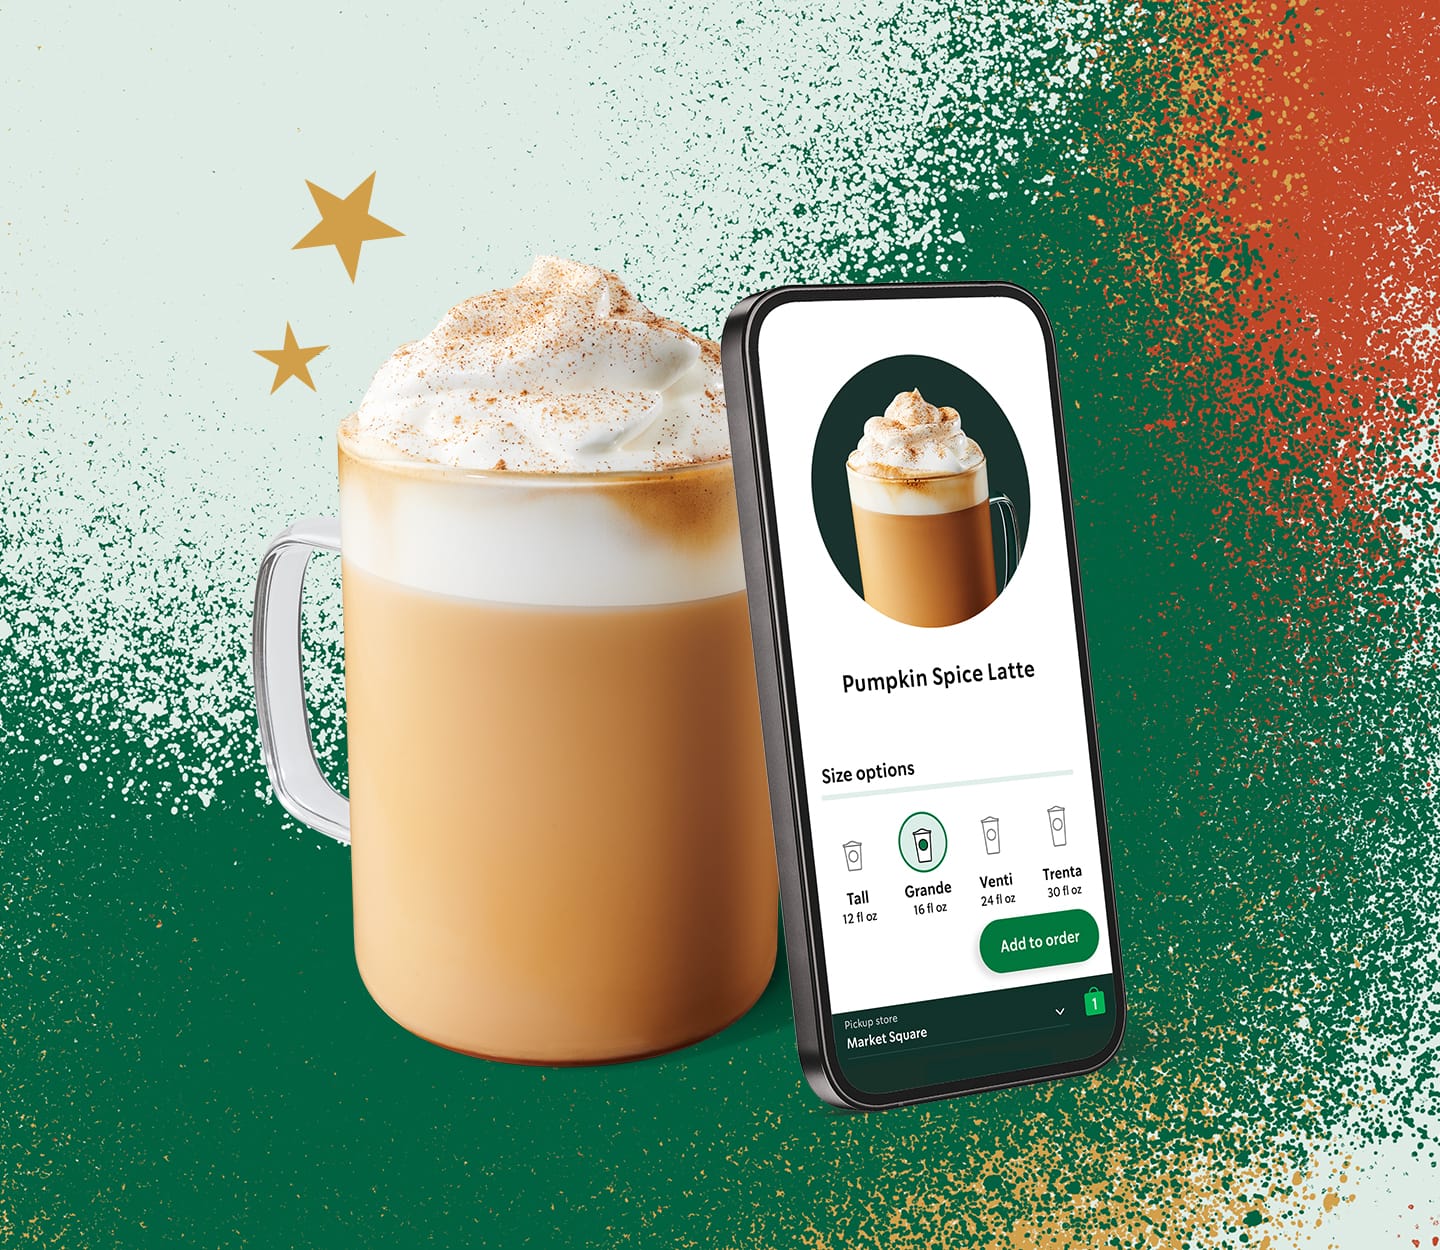 Pumpkin Spice Latte pictured with a phone featuring the Starbucks app surrounded by gold stars.